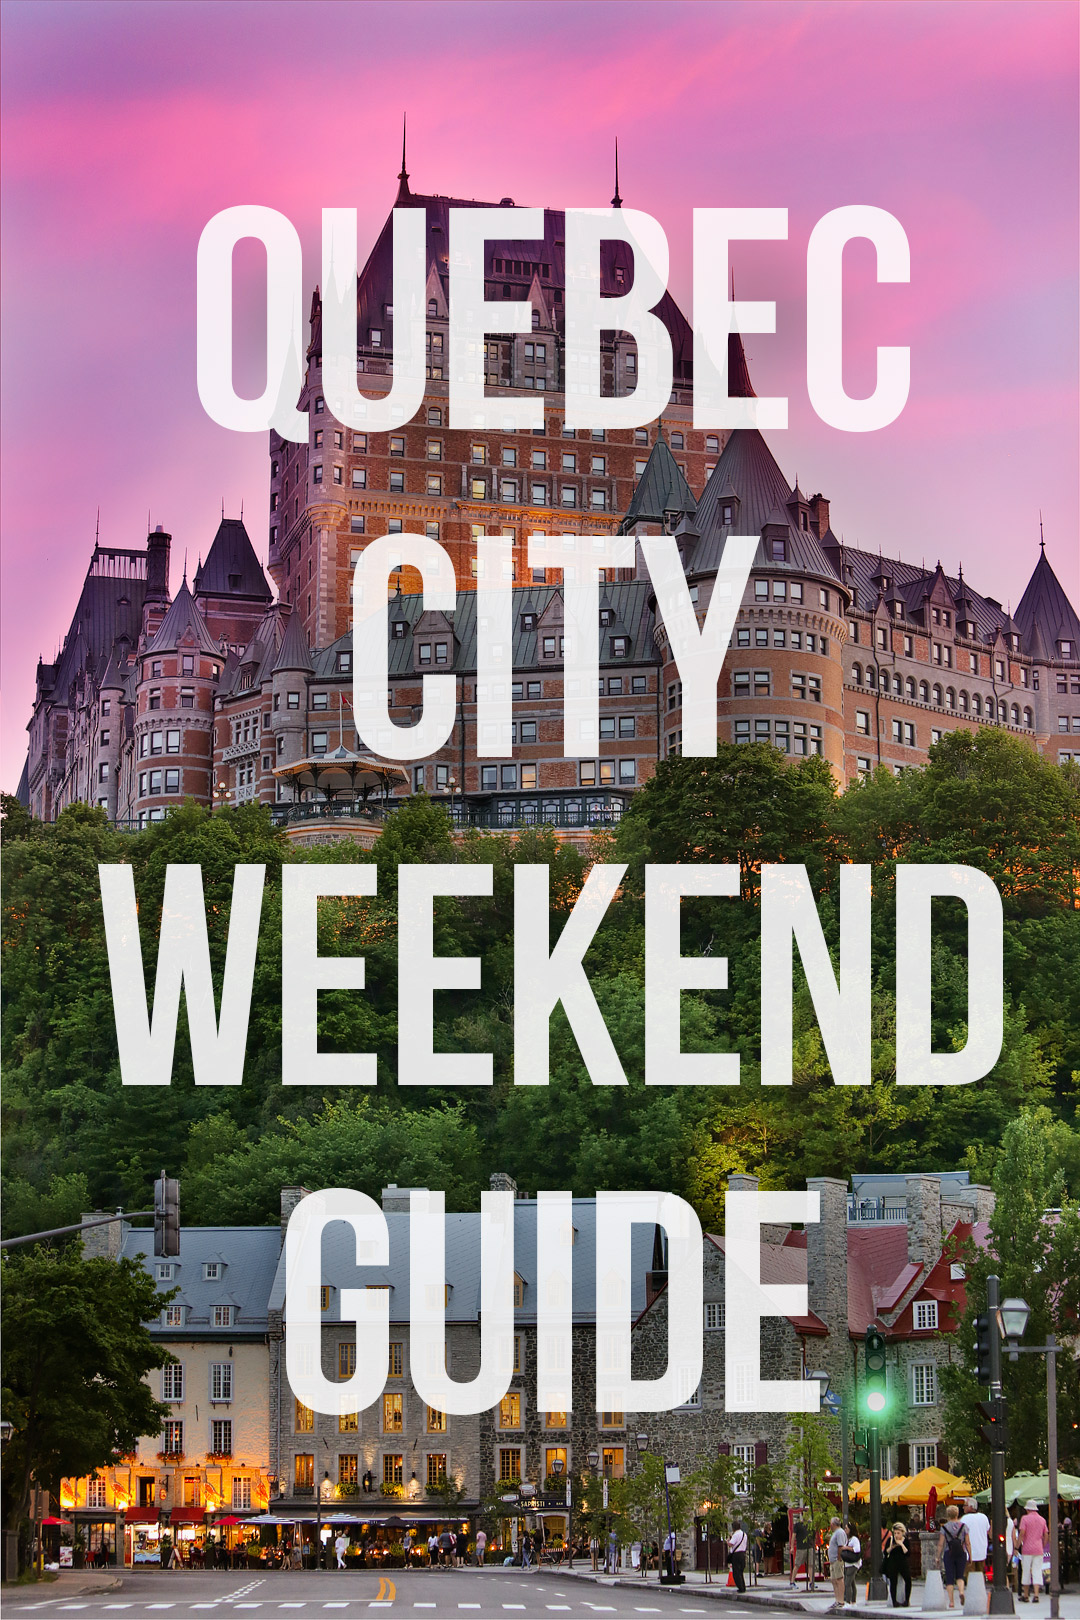 Heading to Quebec City? Save this pin and click through to check out my list of the best things to do in quebec city. The list includes which old quebec city hotel you can’t miss, the best quebec city tourist attractions, the day trips from quebec city that are worth your time, and more. It also has general travel tips and where to stay in quebec city. // Local Adventurer #quebec #quebeccity #canada #travel